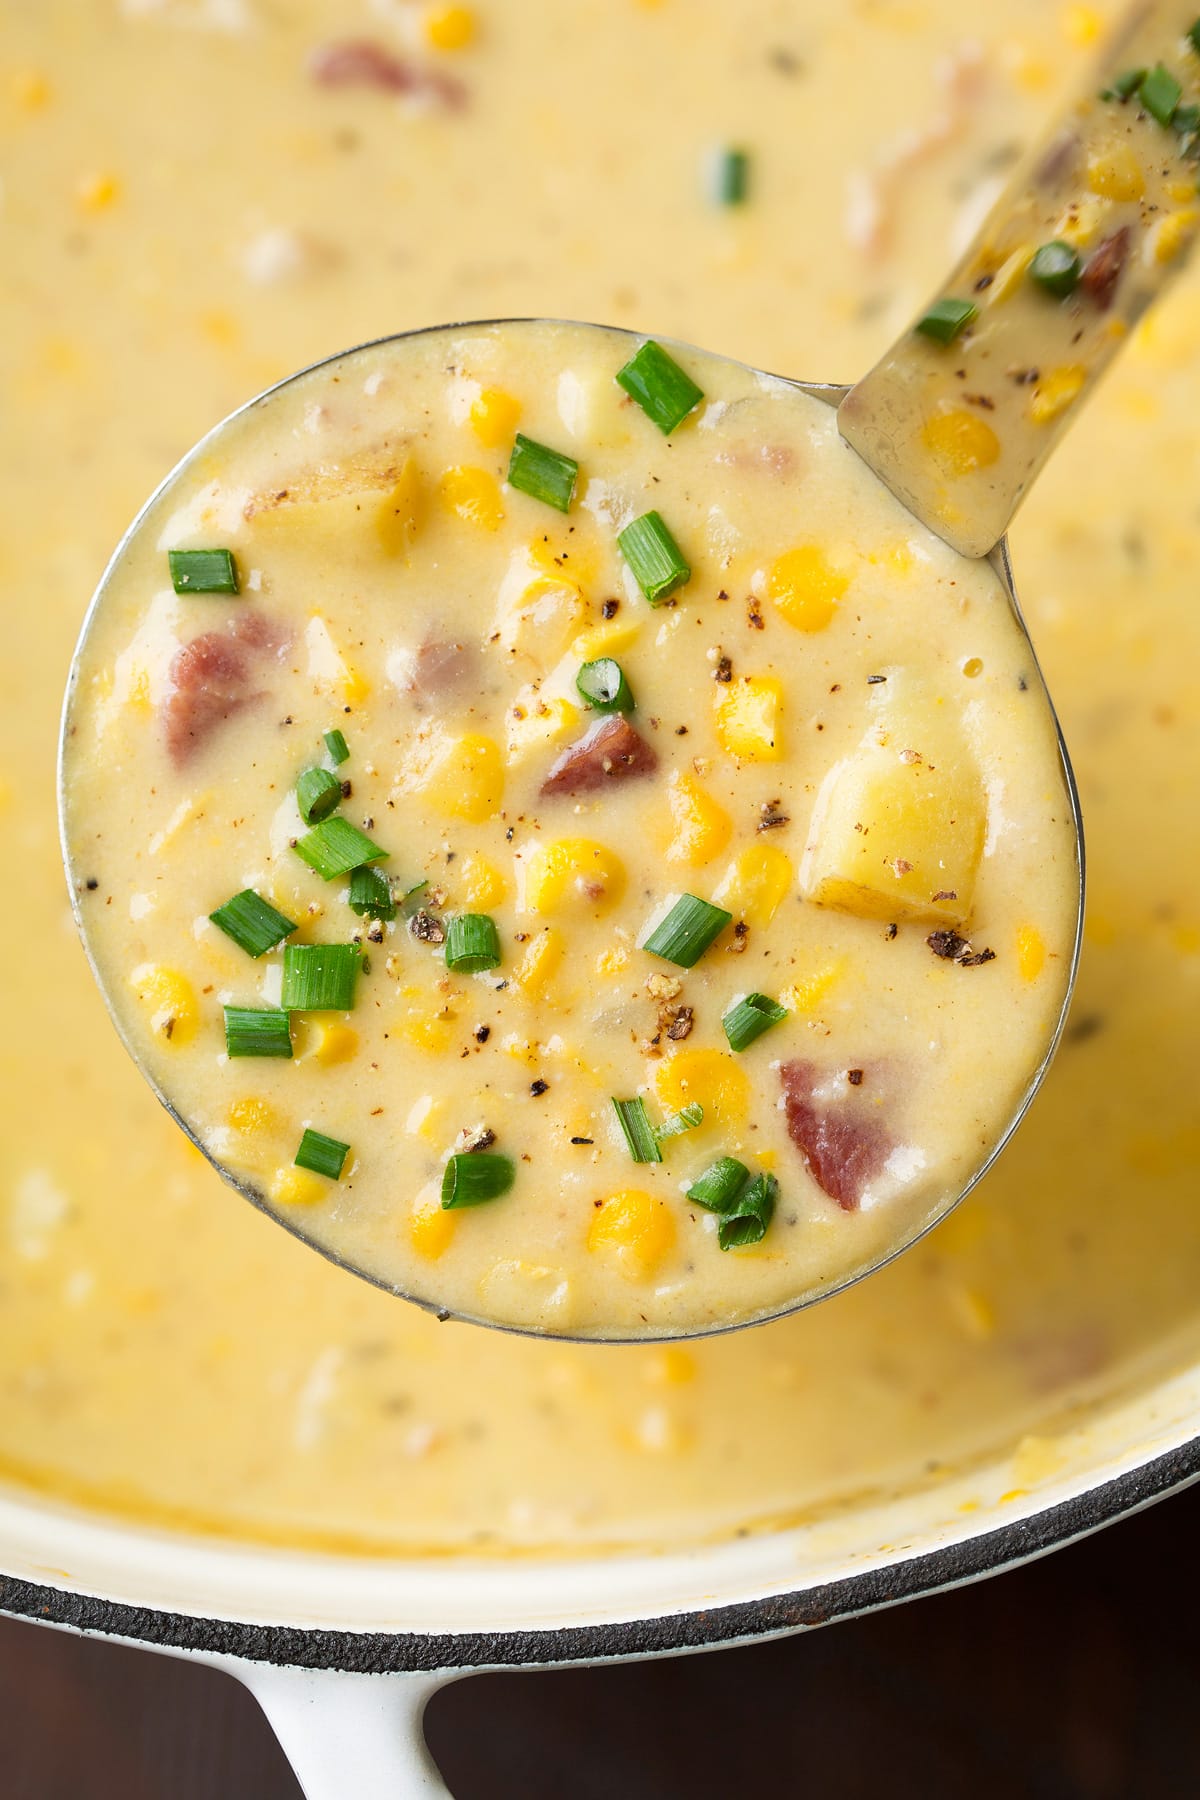 Close up image of corn chowder with potatoes in a ladle.